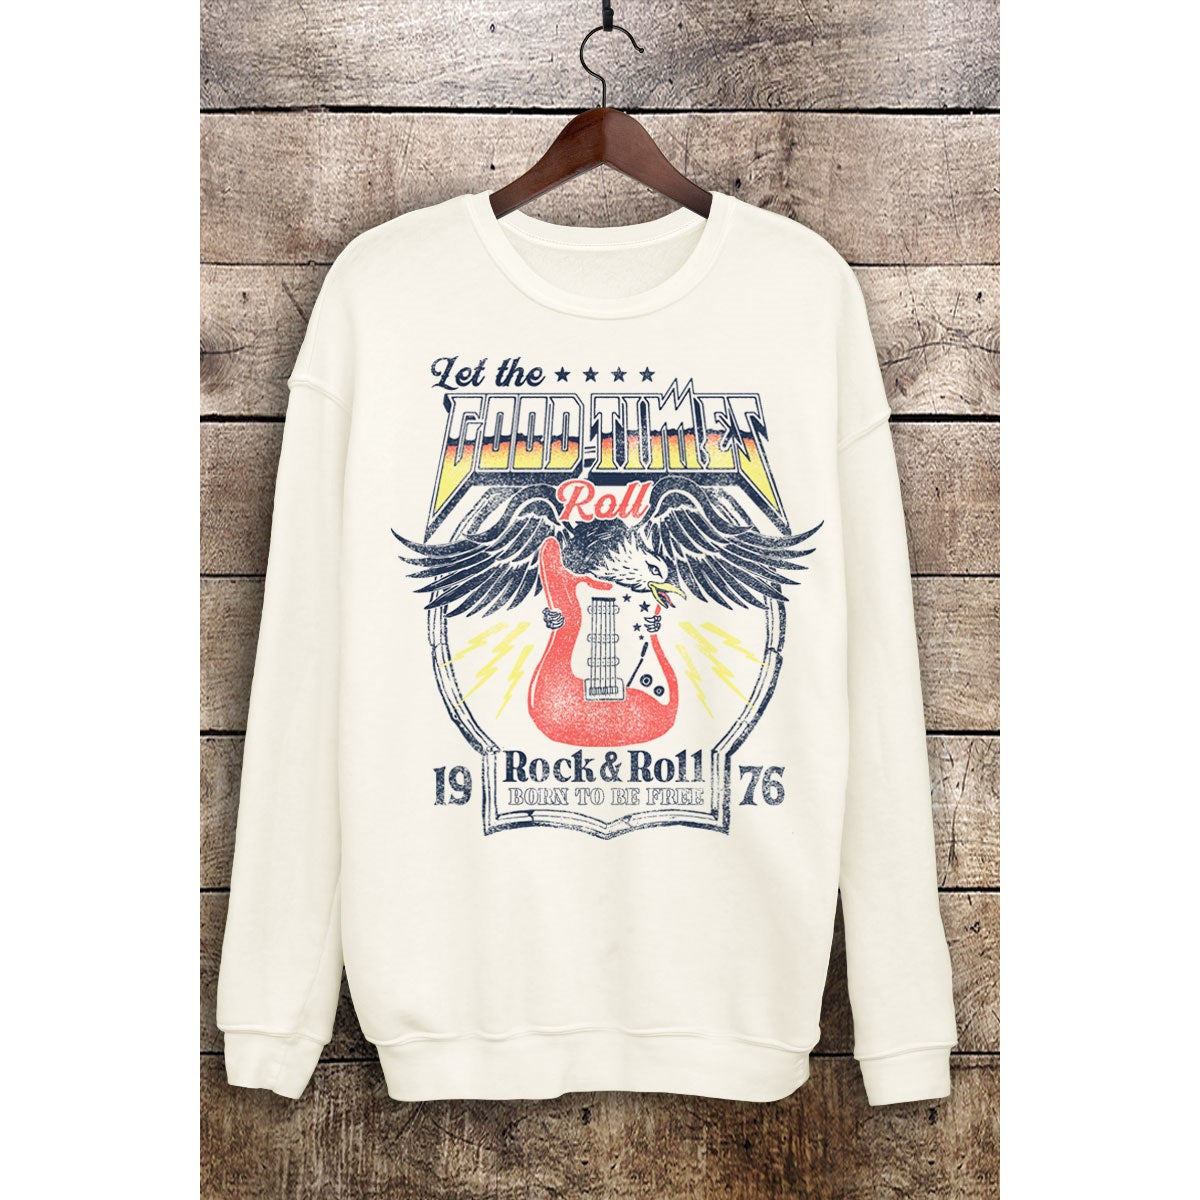 Let the Good Times Roll - Sweatshirt